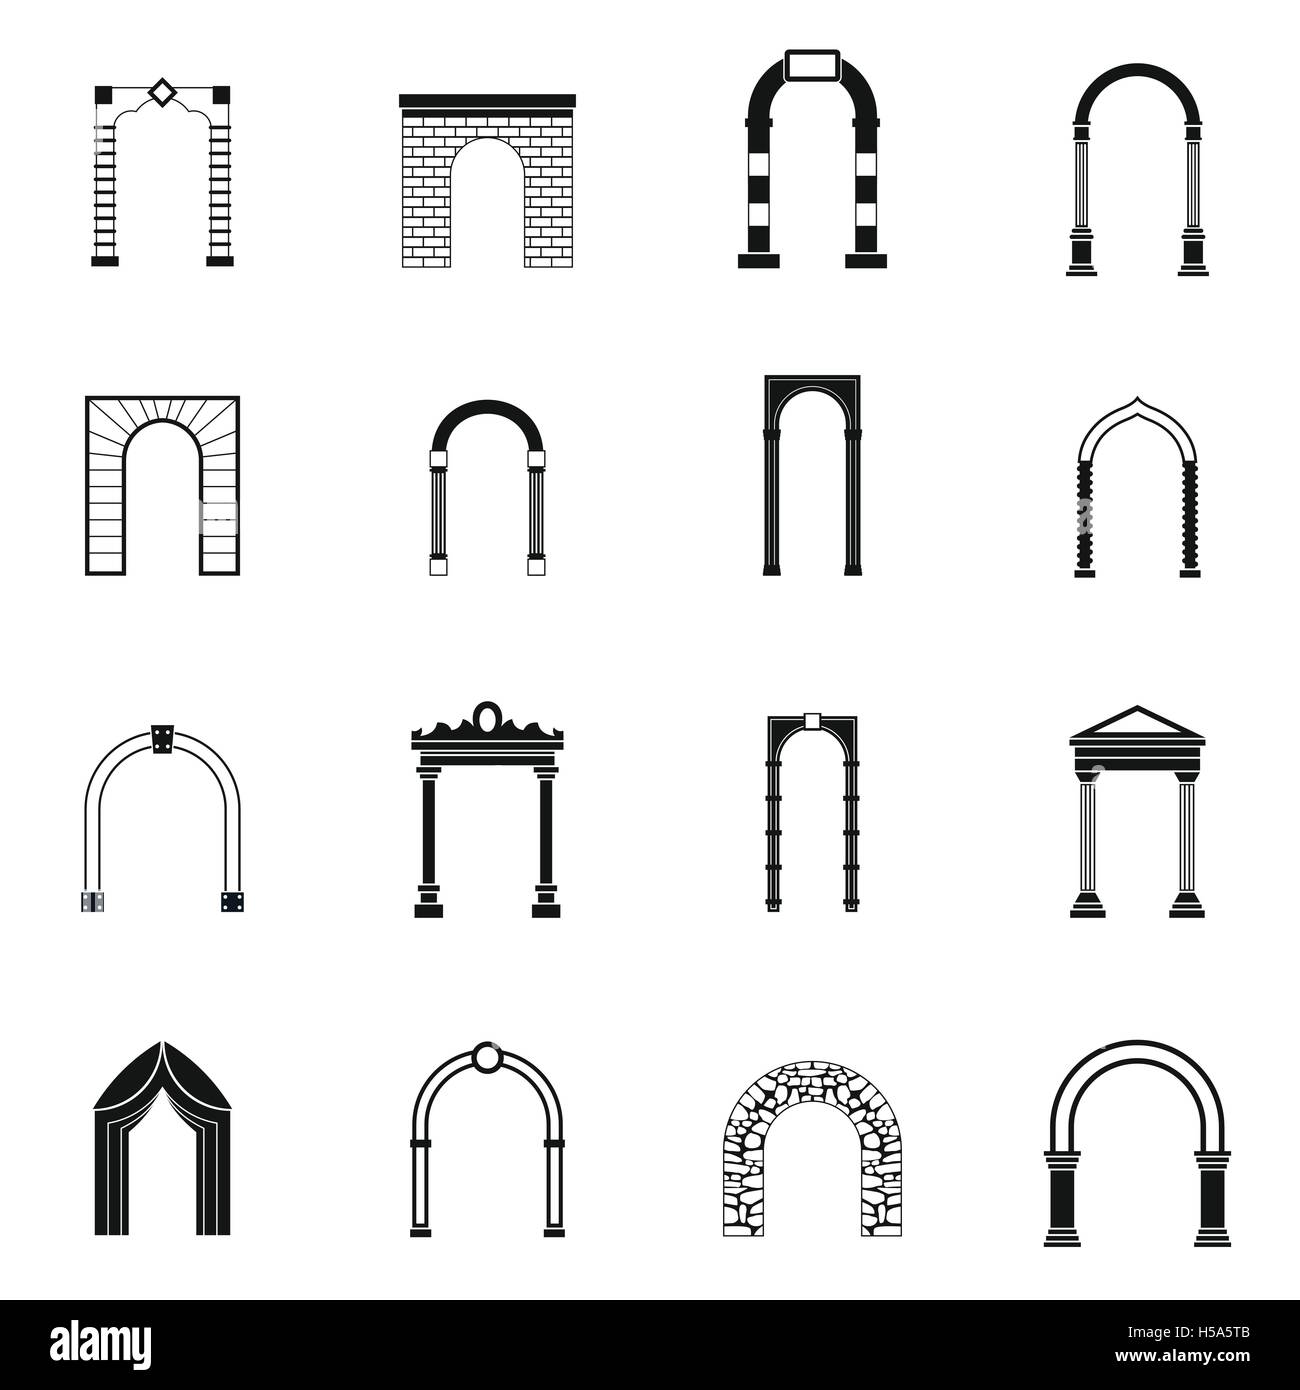 Arch set icons, simple style Stock Vector